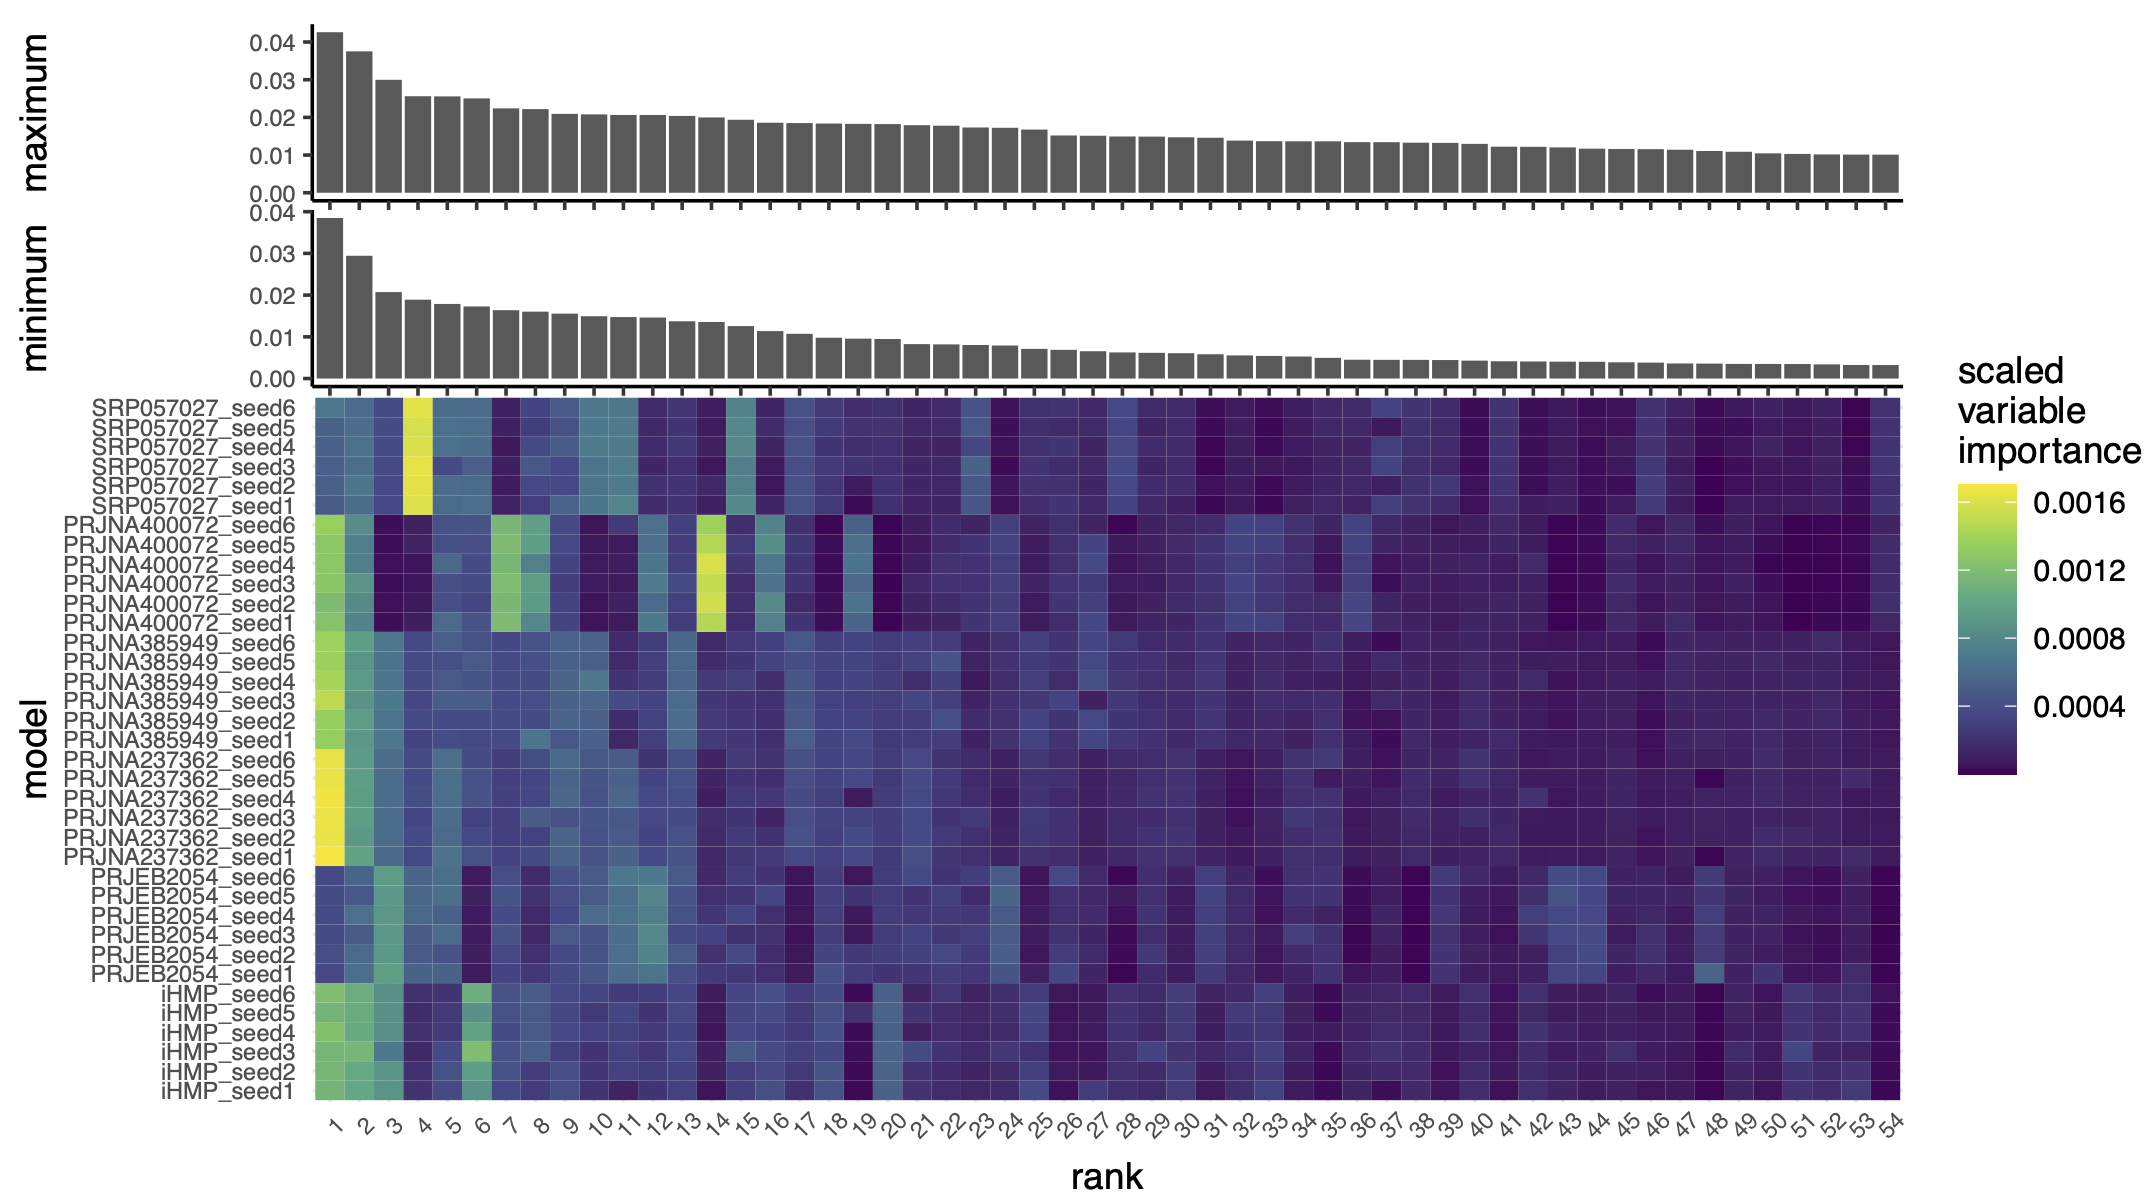 Figure S2: Fifty-four genomes are important across models and anchor the majority of variable importance.. The bottom panel depicts a heat map of the scale variable importance contributed by k-mers that anchored to each of the top 54 genomes that were important for predicting IBD subtype. Models are labelled by the validation study and by the random seed used to build the model.Rank corresponds to the genome that anchored the most variable importance. Rank:species can be decoded using the tree in Figure S1. The top panels depict bar charts that correspond to the minimum (lower) or maximum (upper) variable importance a genome could anchor. The minimum variable importance was estimated following the sourmash gather algorithm, where each important k-mer was assigned to only one genome, and the genome it was assigned to was determined by a greedy winner-takes-all approach. Therefore, in the minimum bar chart, variable importance attributable to a k-mer was only summed once per k-mer, even if that k-mer occurred in multiple genomes. The maximum variable importance was estimated by allowing k-mers to be anchored to multiple genomes, so all k-mers were assigned to all possible genomes even if that meant a k-mer was assigned multiple times.